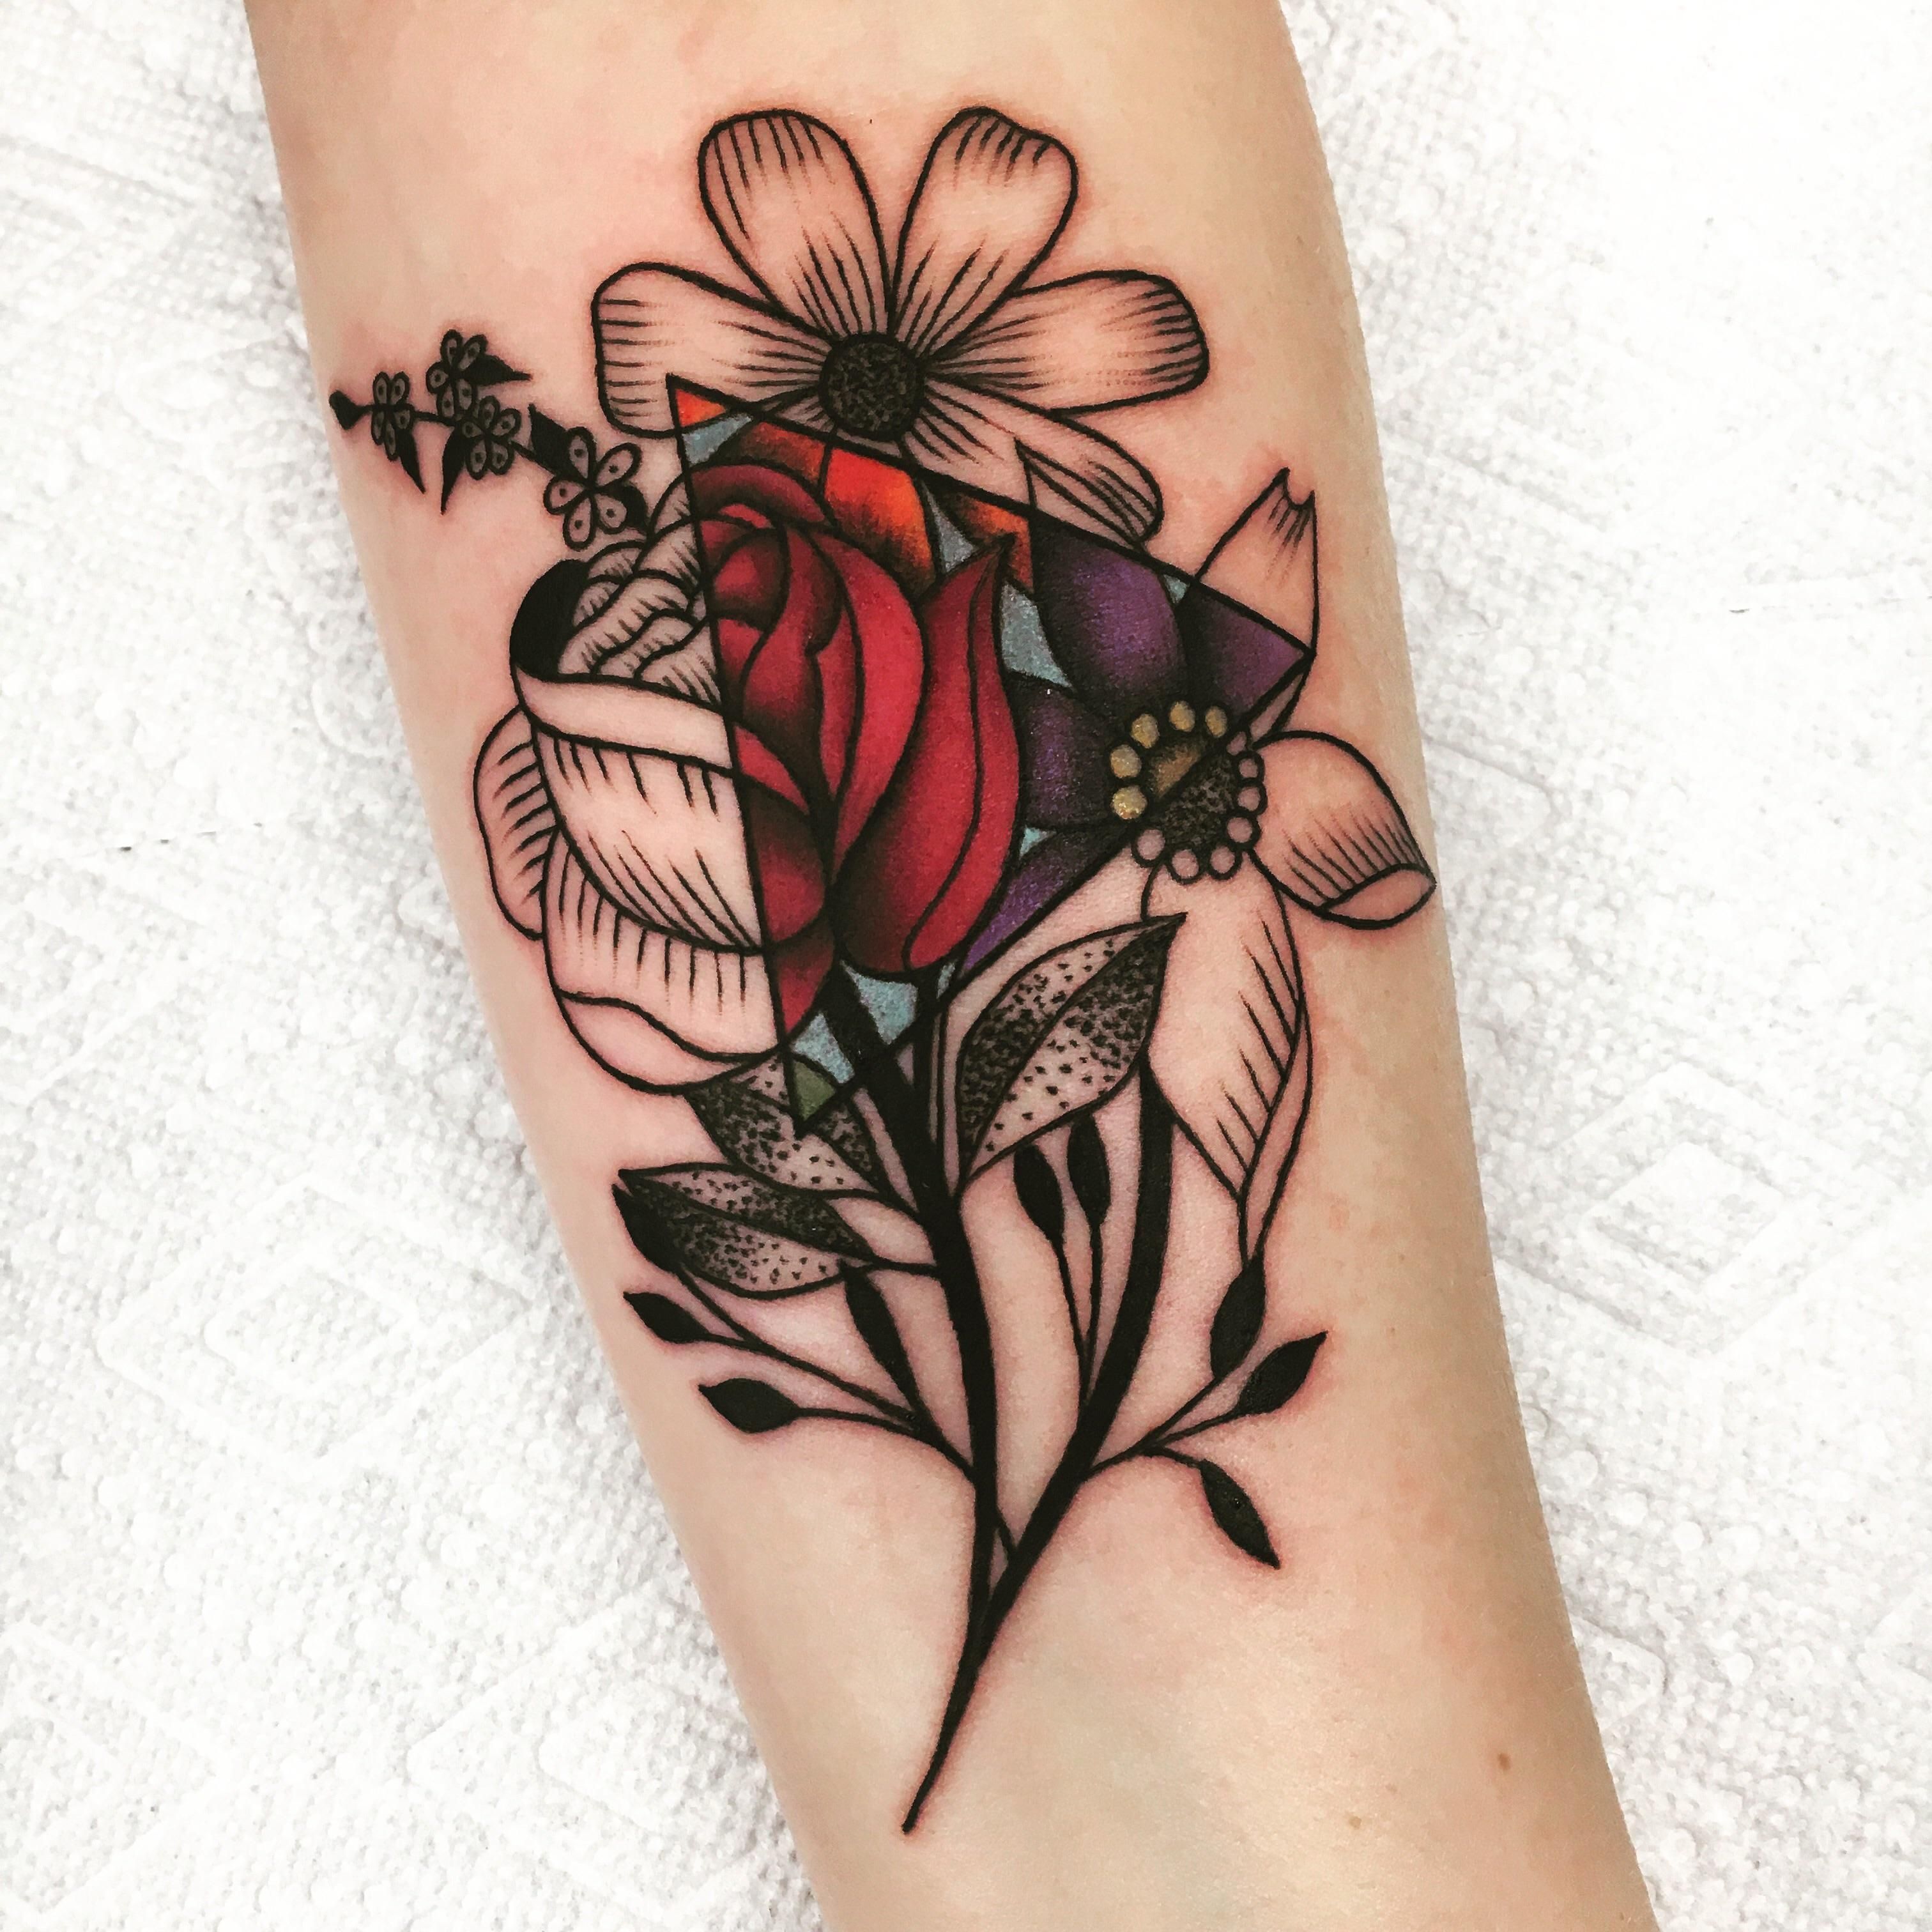 My Wife’s fresh floral stippling tattoo by Alexx Colombo @ Tattoo Lou’s Selden NY